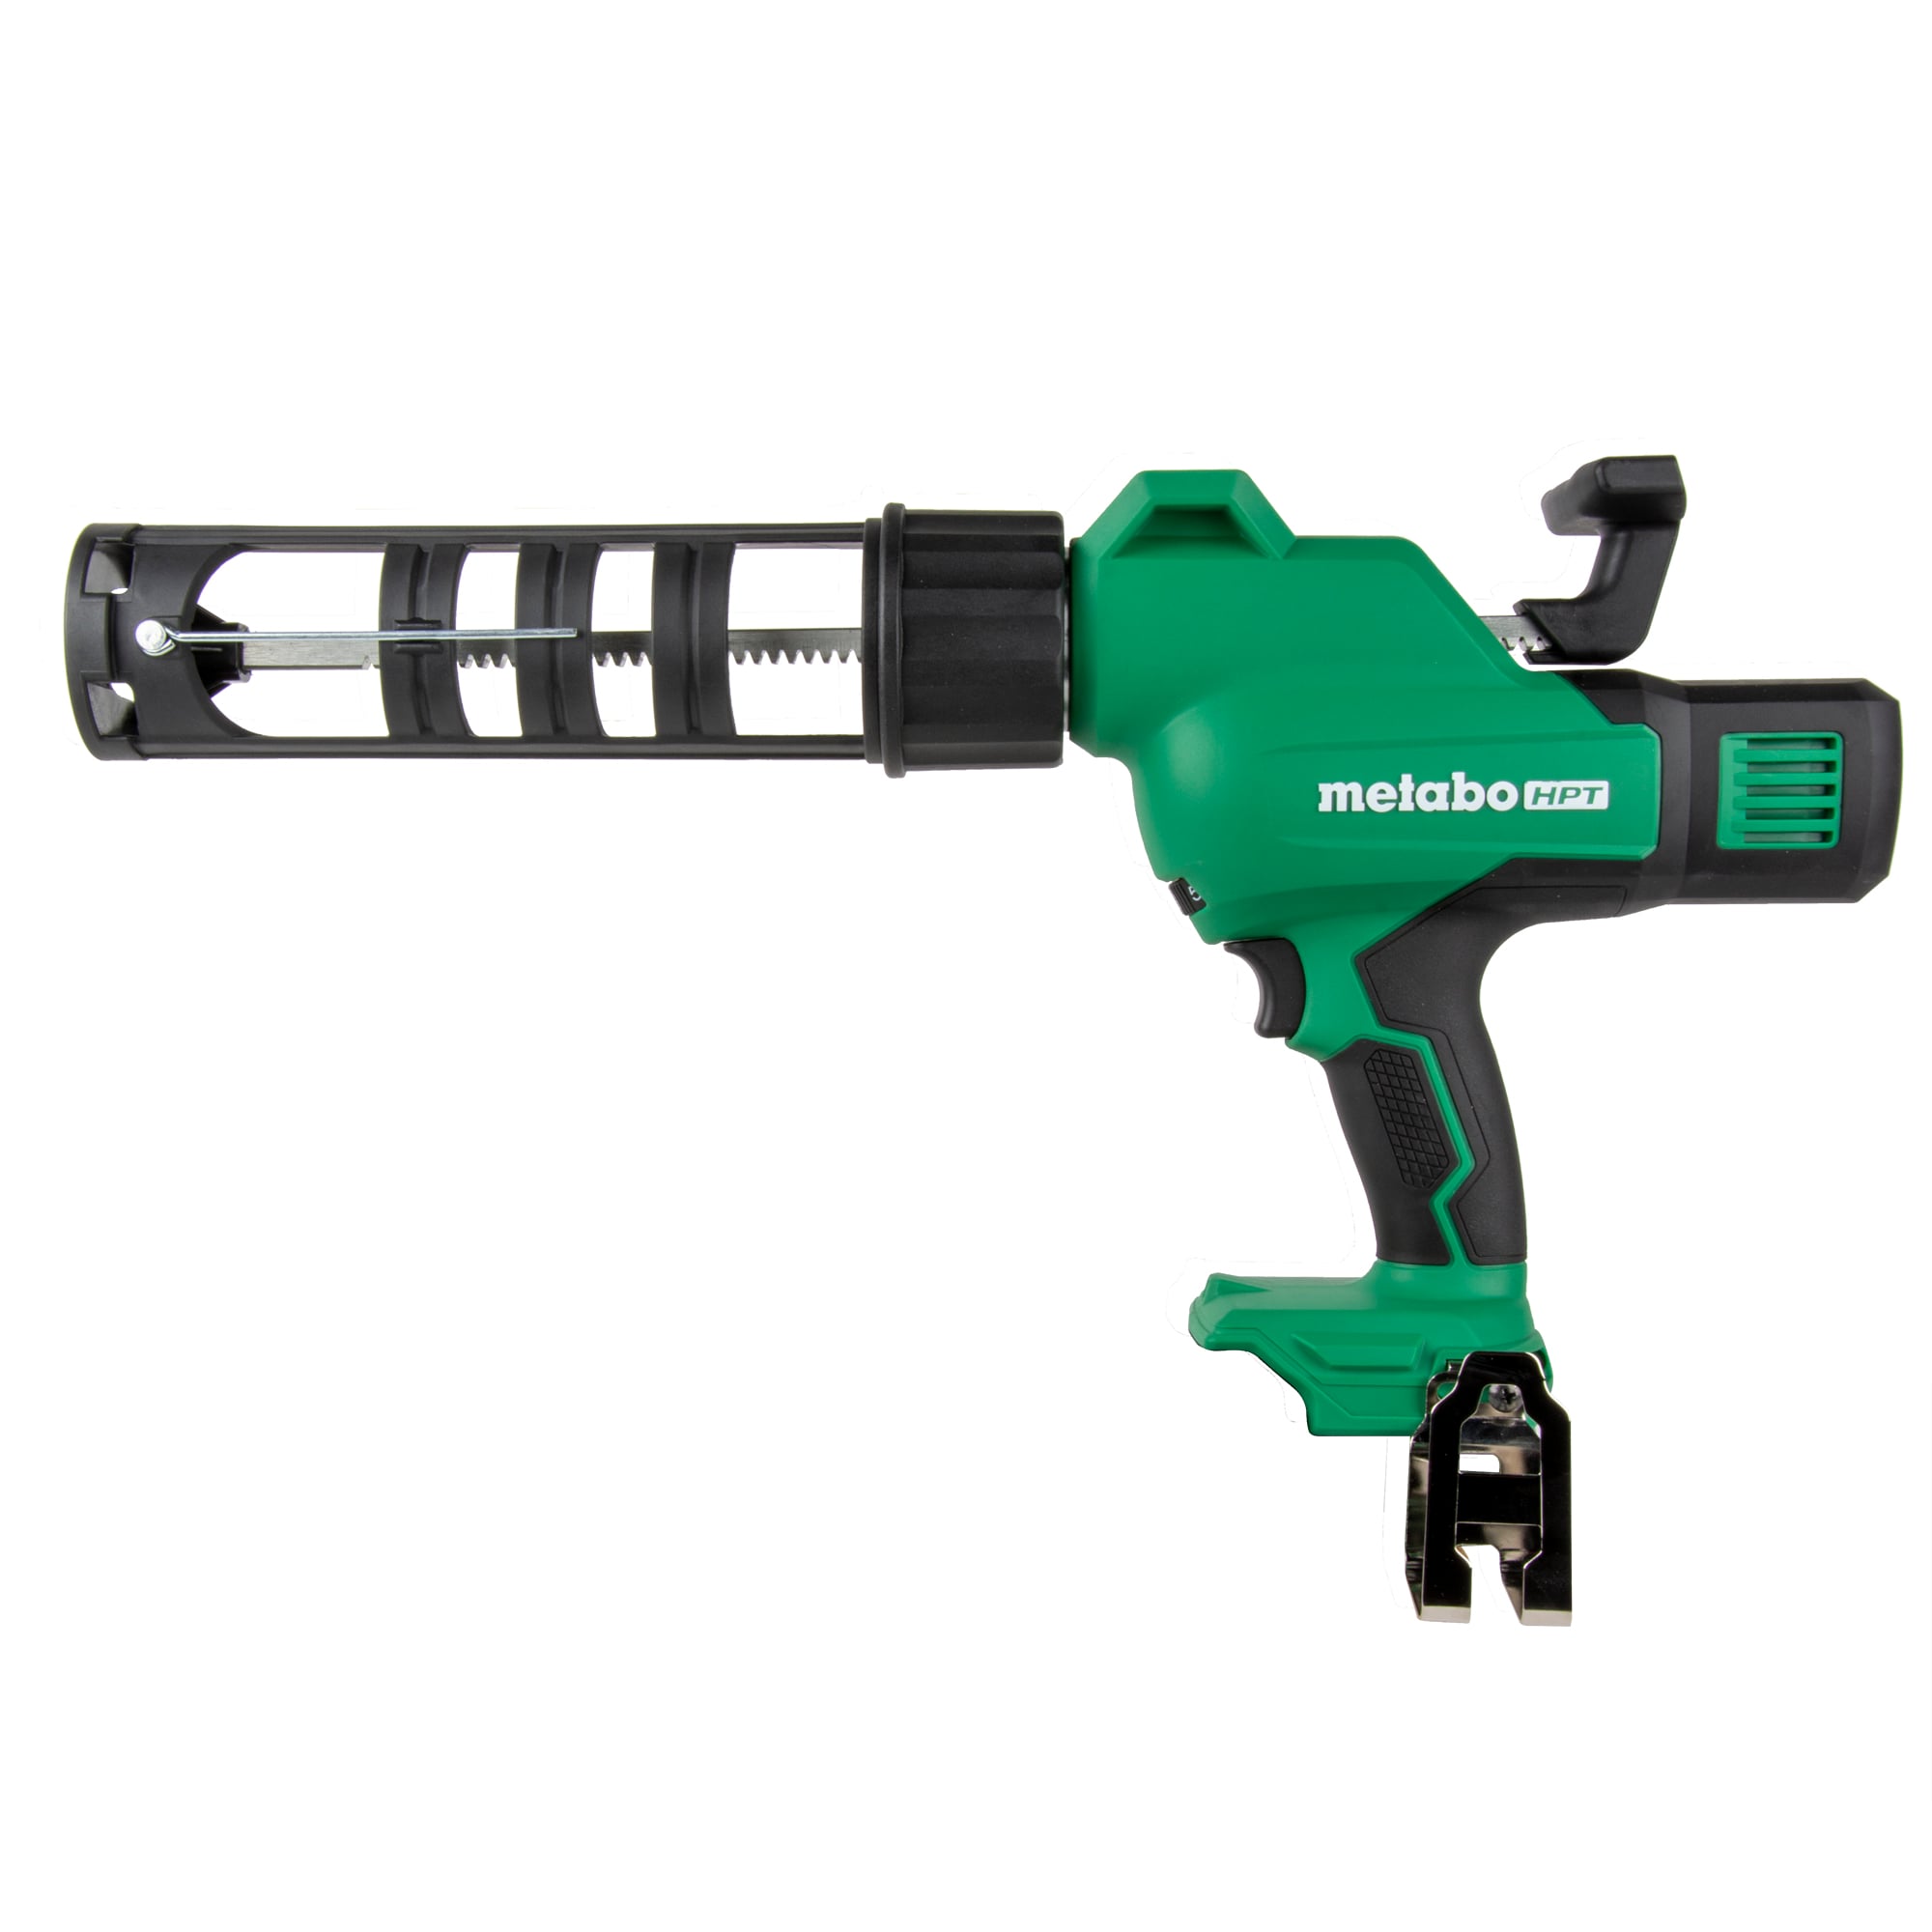  Electric Cordless Caulking Gun with 2000mA Li-Ion Battery,  Sealant Adhesive Gun, Perfect for Sealing and Filling with Silicone and  Other Adhesives, 4 Adjustable Speeds : Tools & Home Improvement